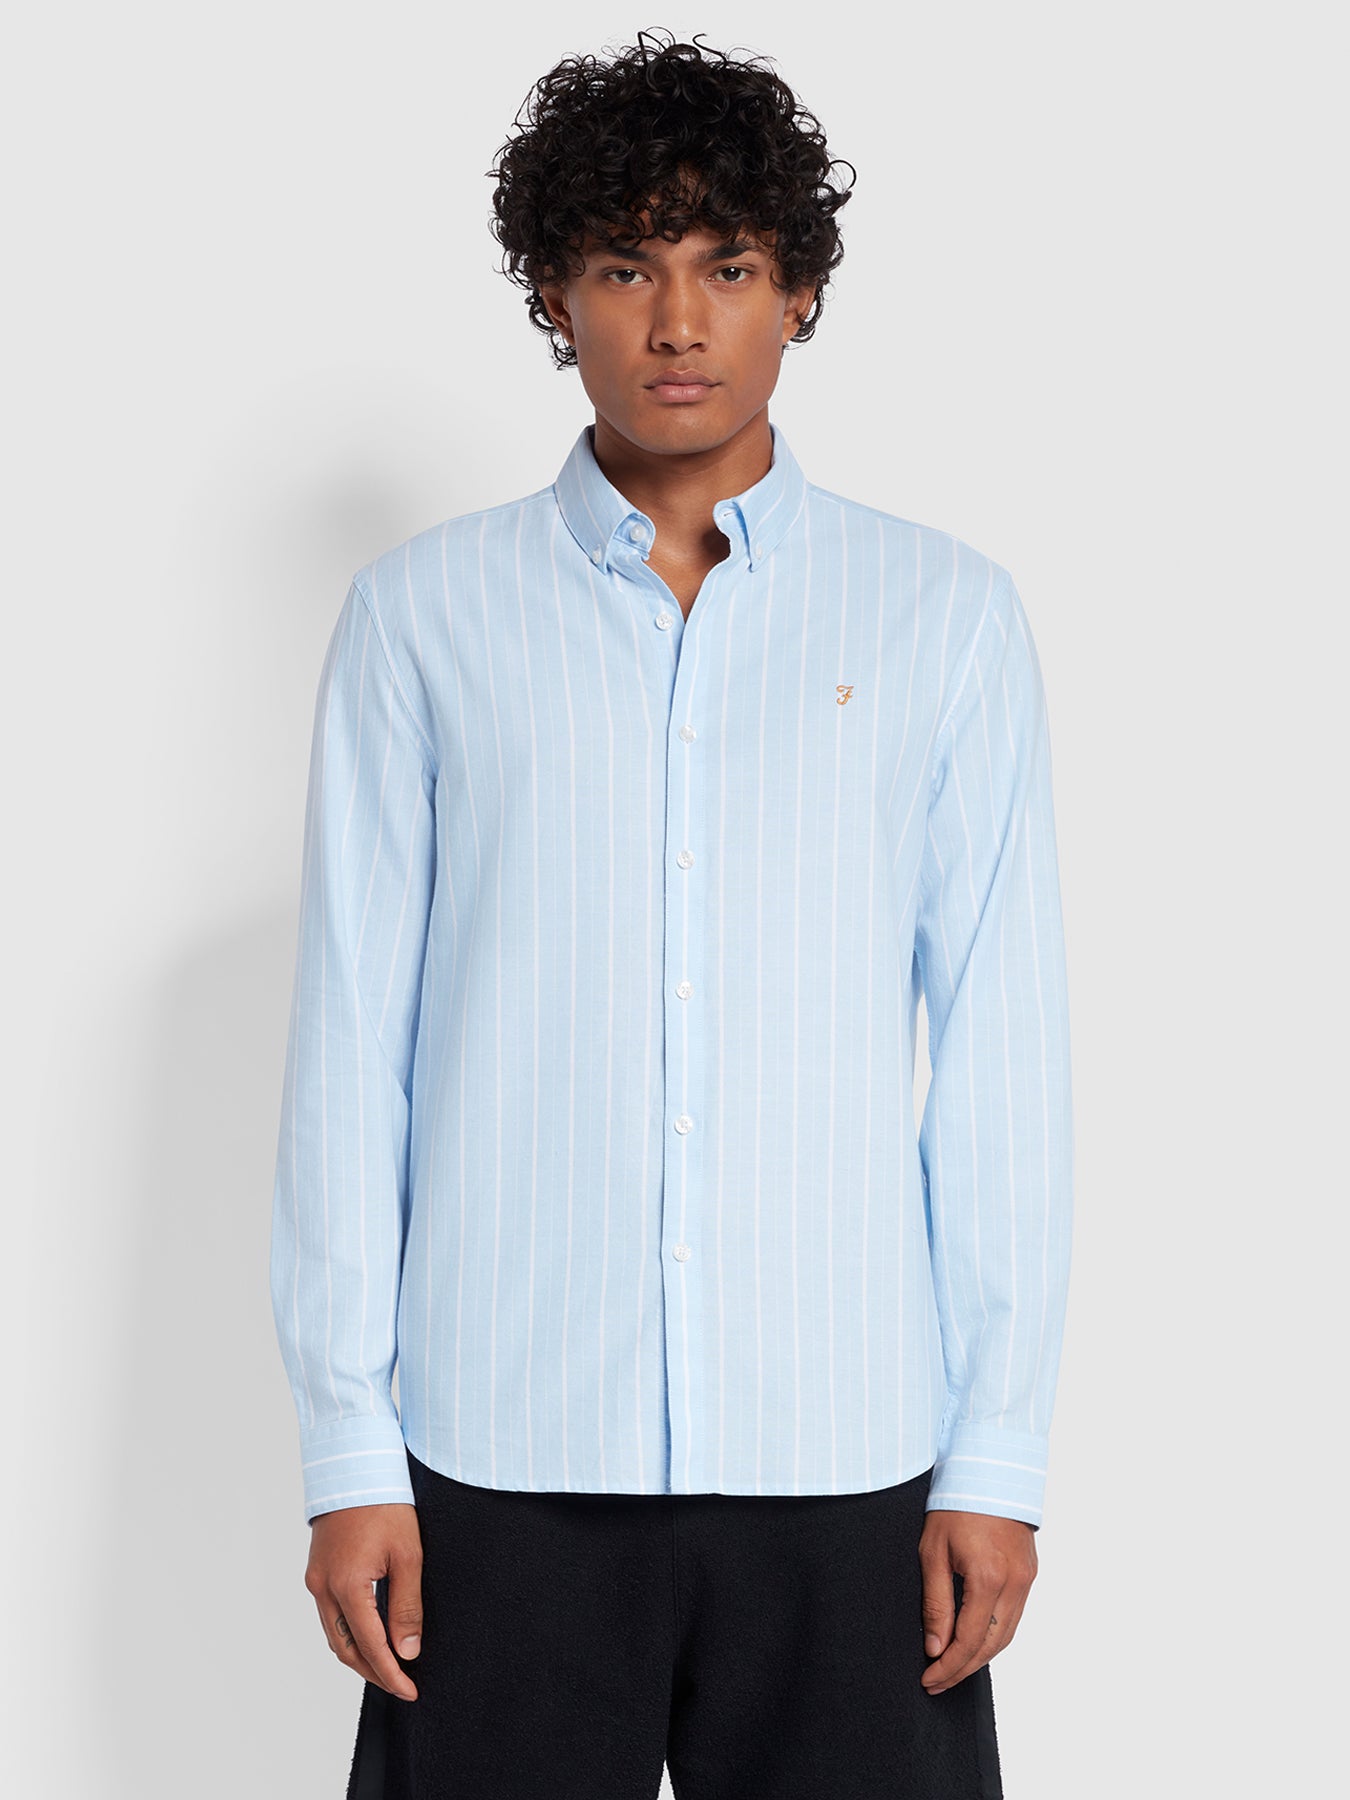 View Brewer Casual Fit Long Sleeve Wide Stripe Shirt In Sky Blue information